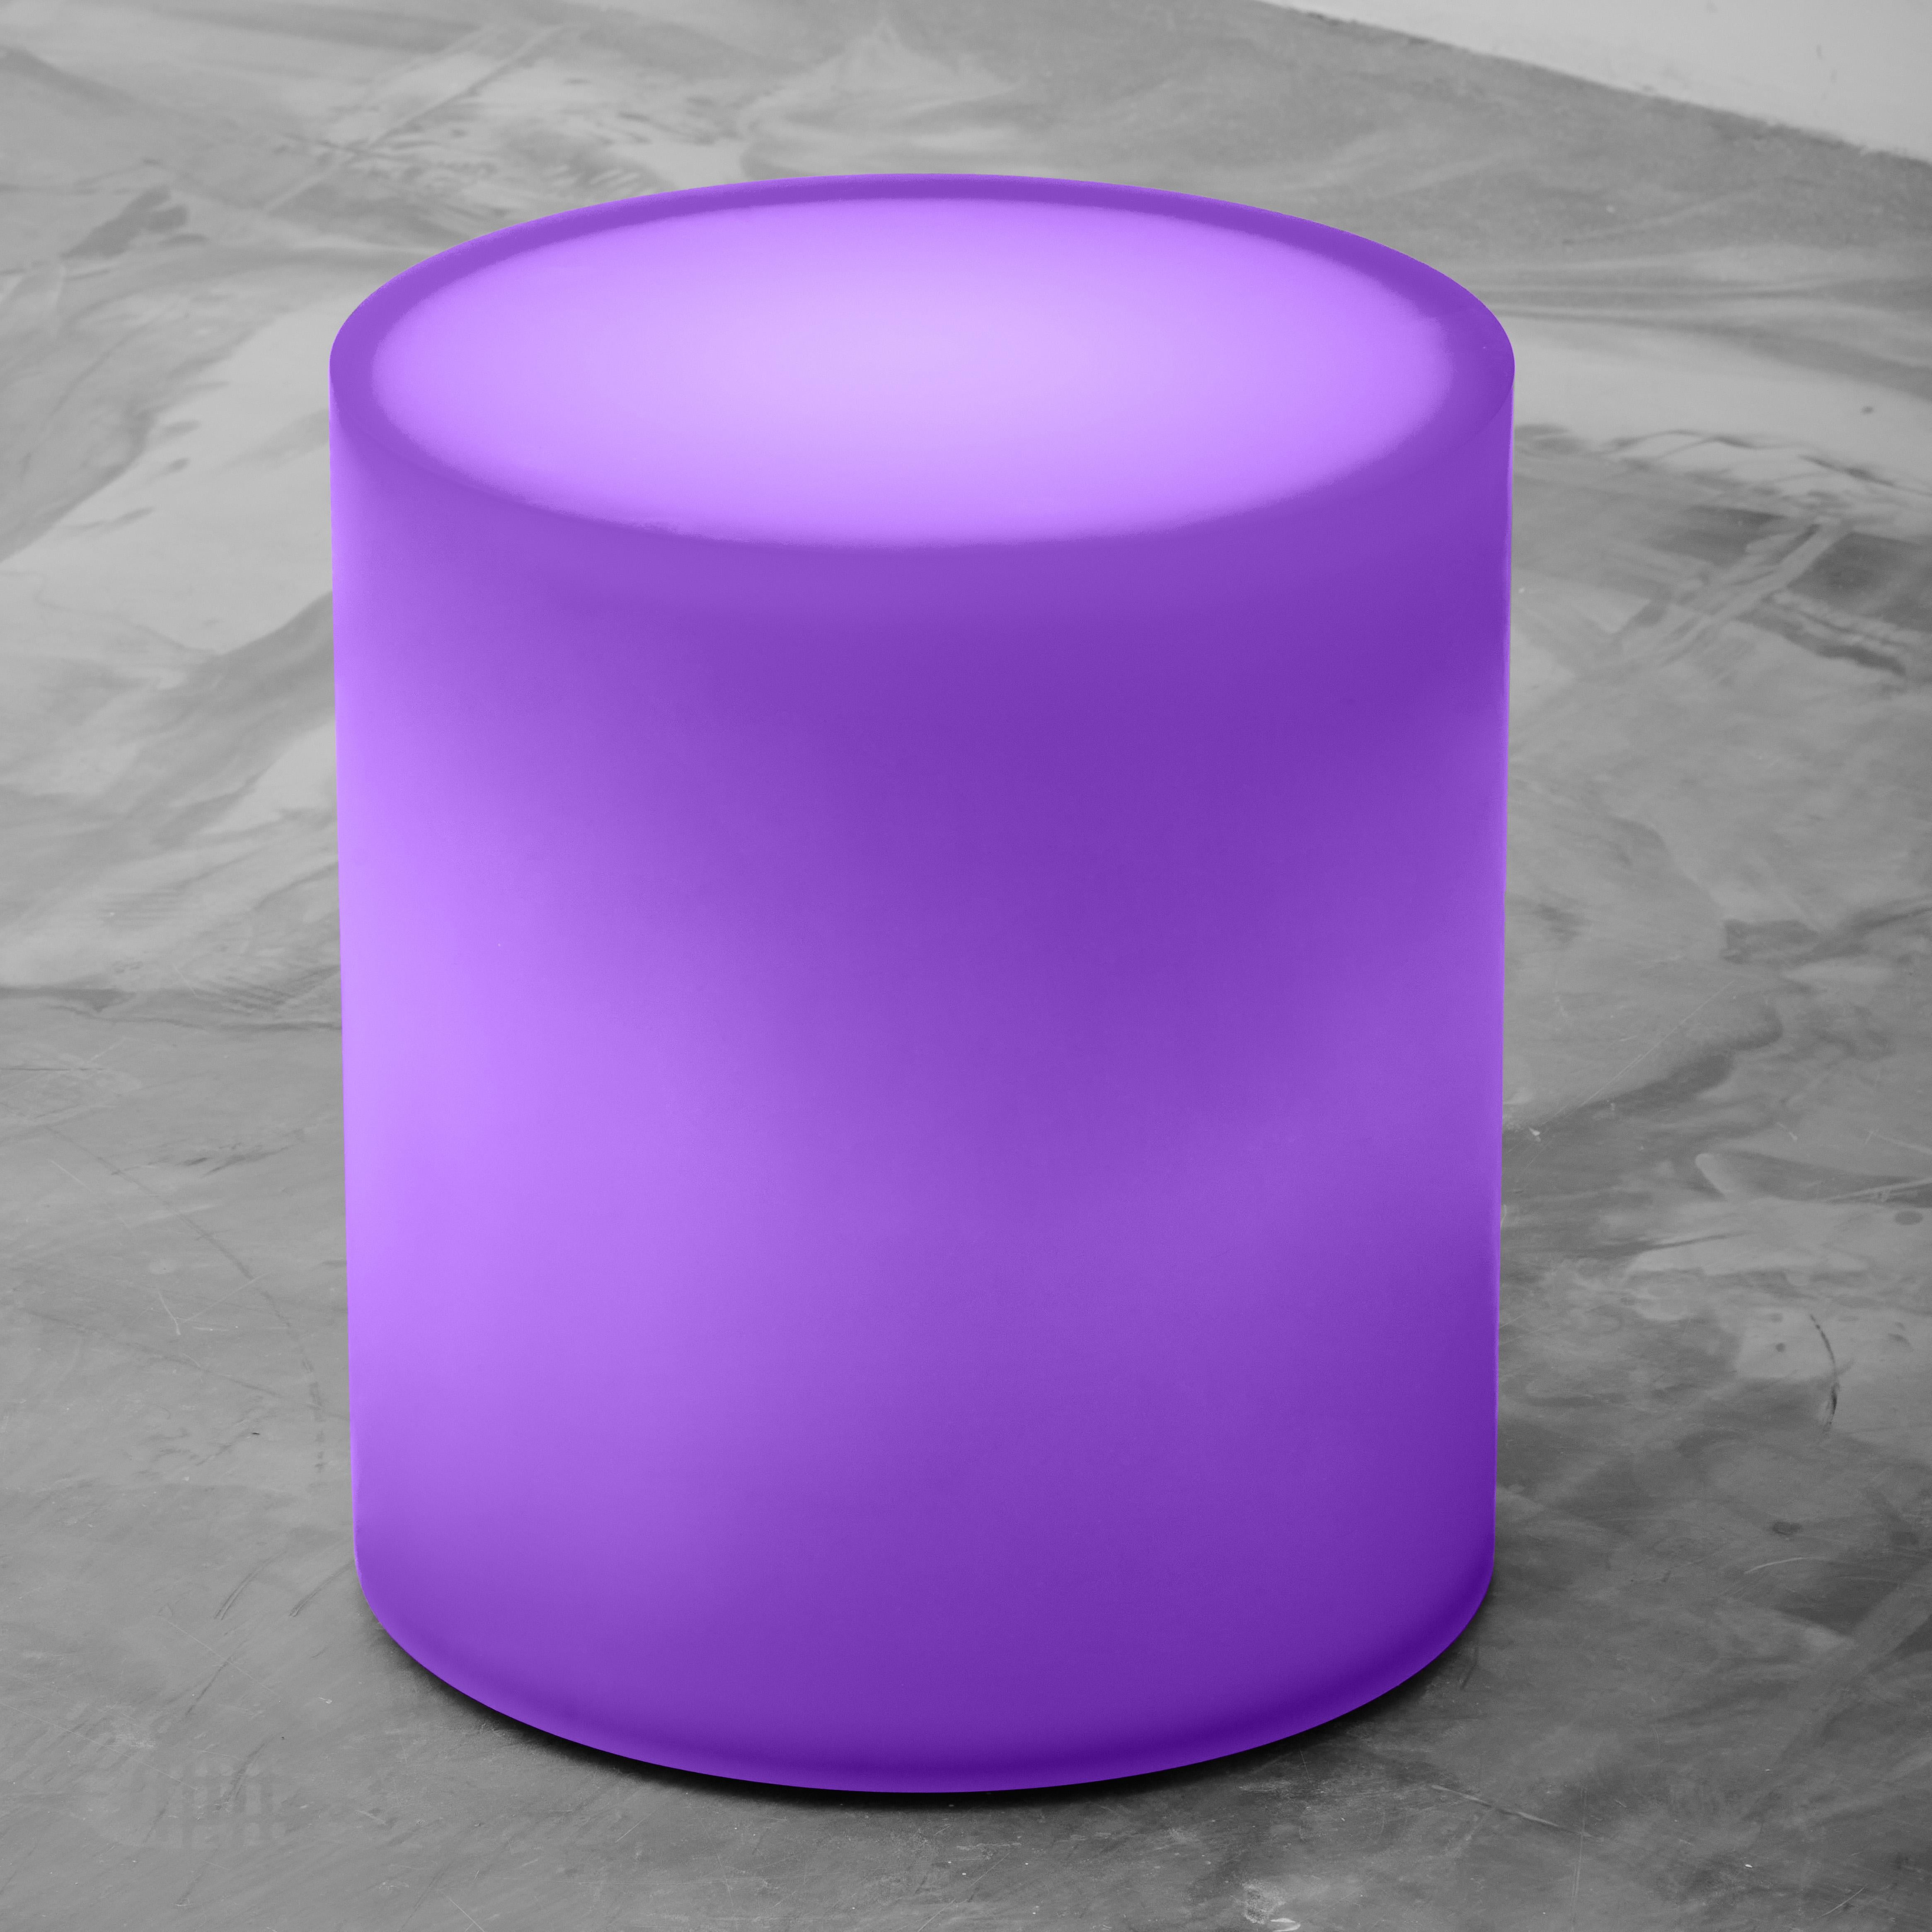 Contemporary Drum Resin Side Table/Stool In Purple by Facture, Represented by Tuleste Factory For Sale